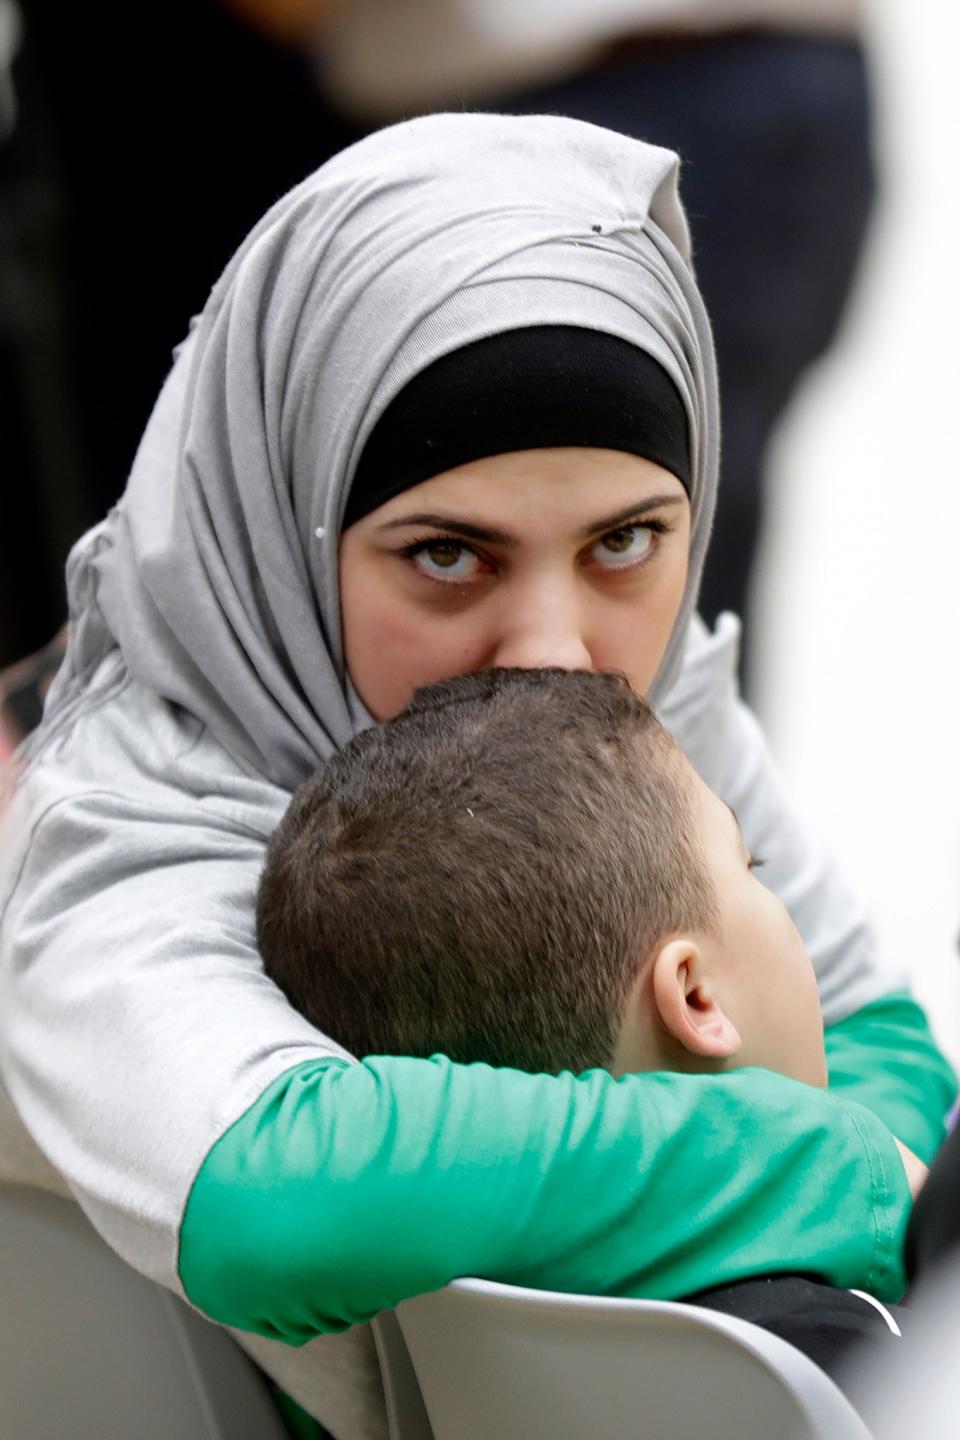 Syrian refugees arrive in Rome, Italy